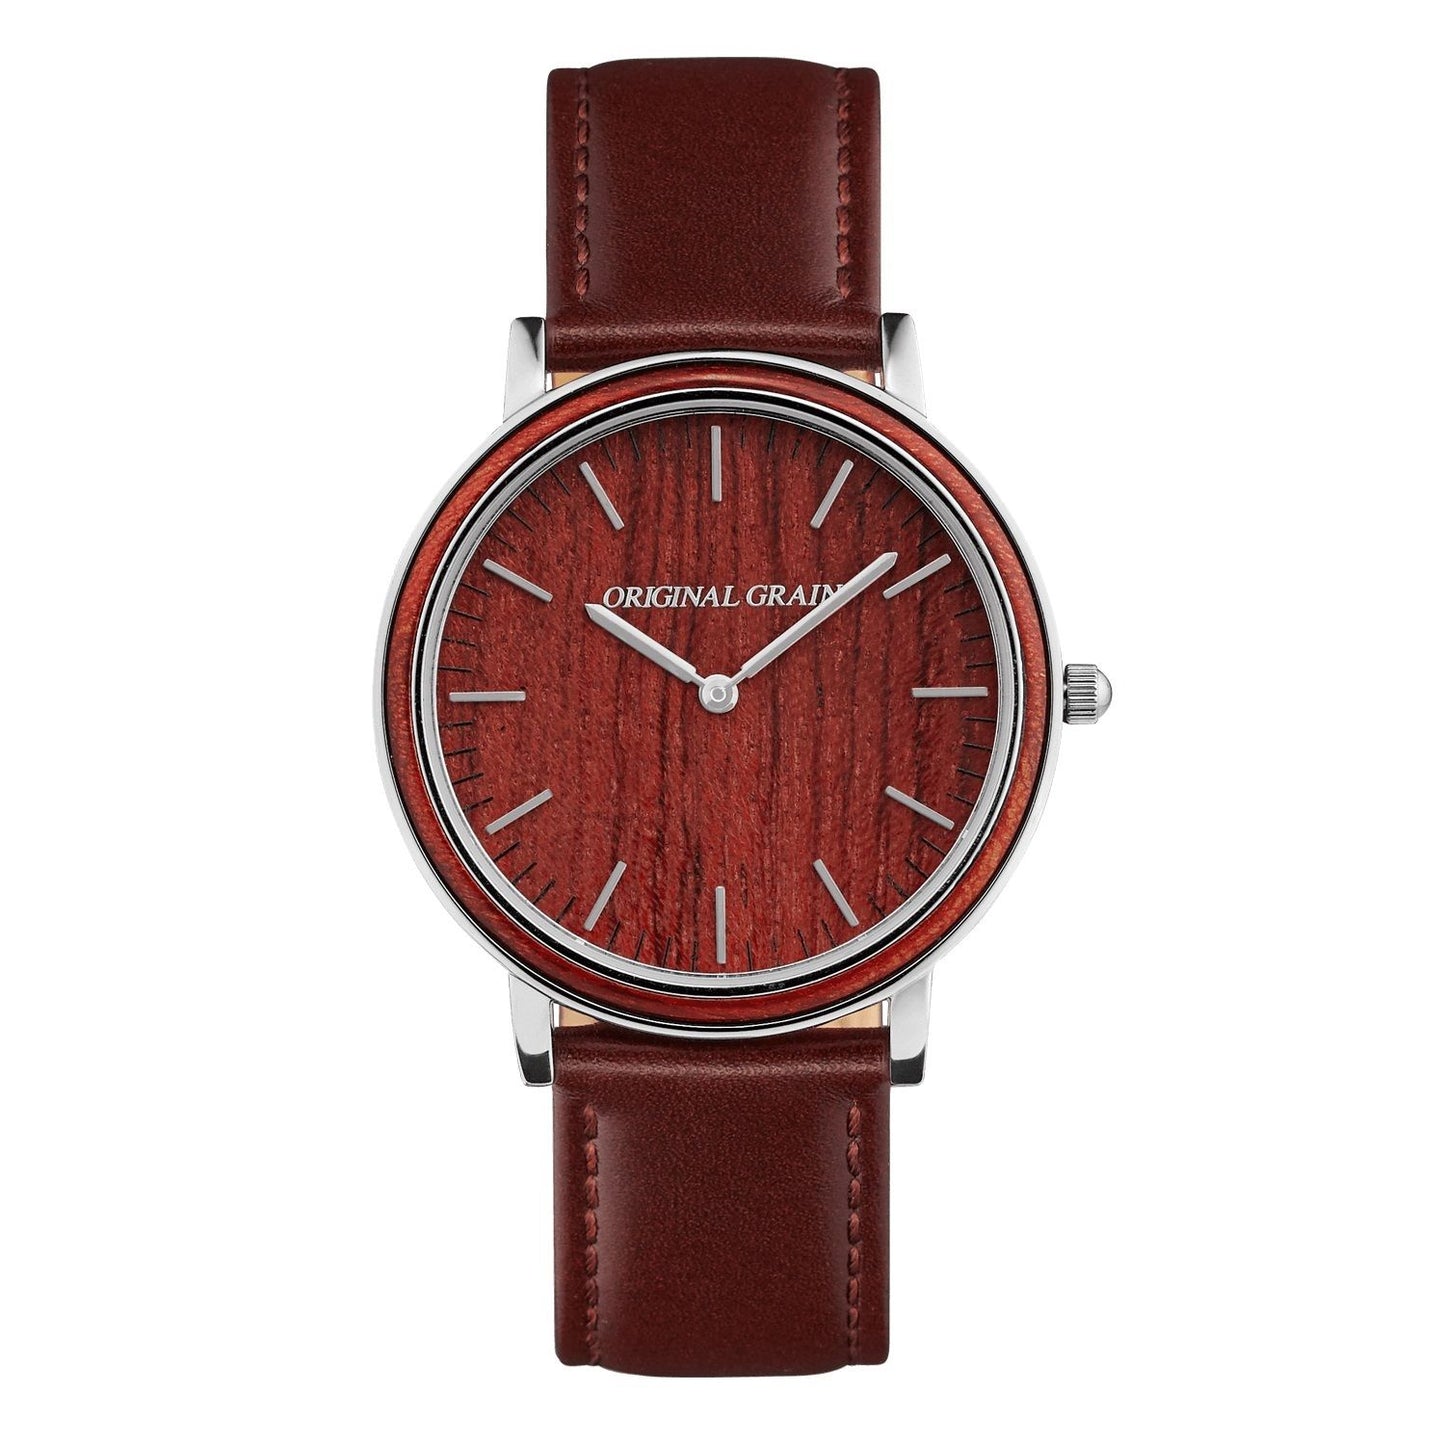 The Minimalist - Rosewood/Chrome/Brown Leather ...